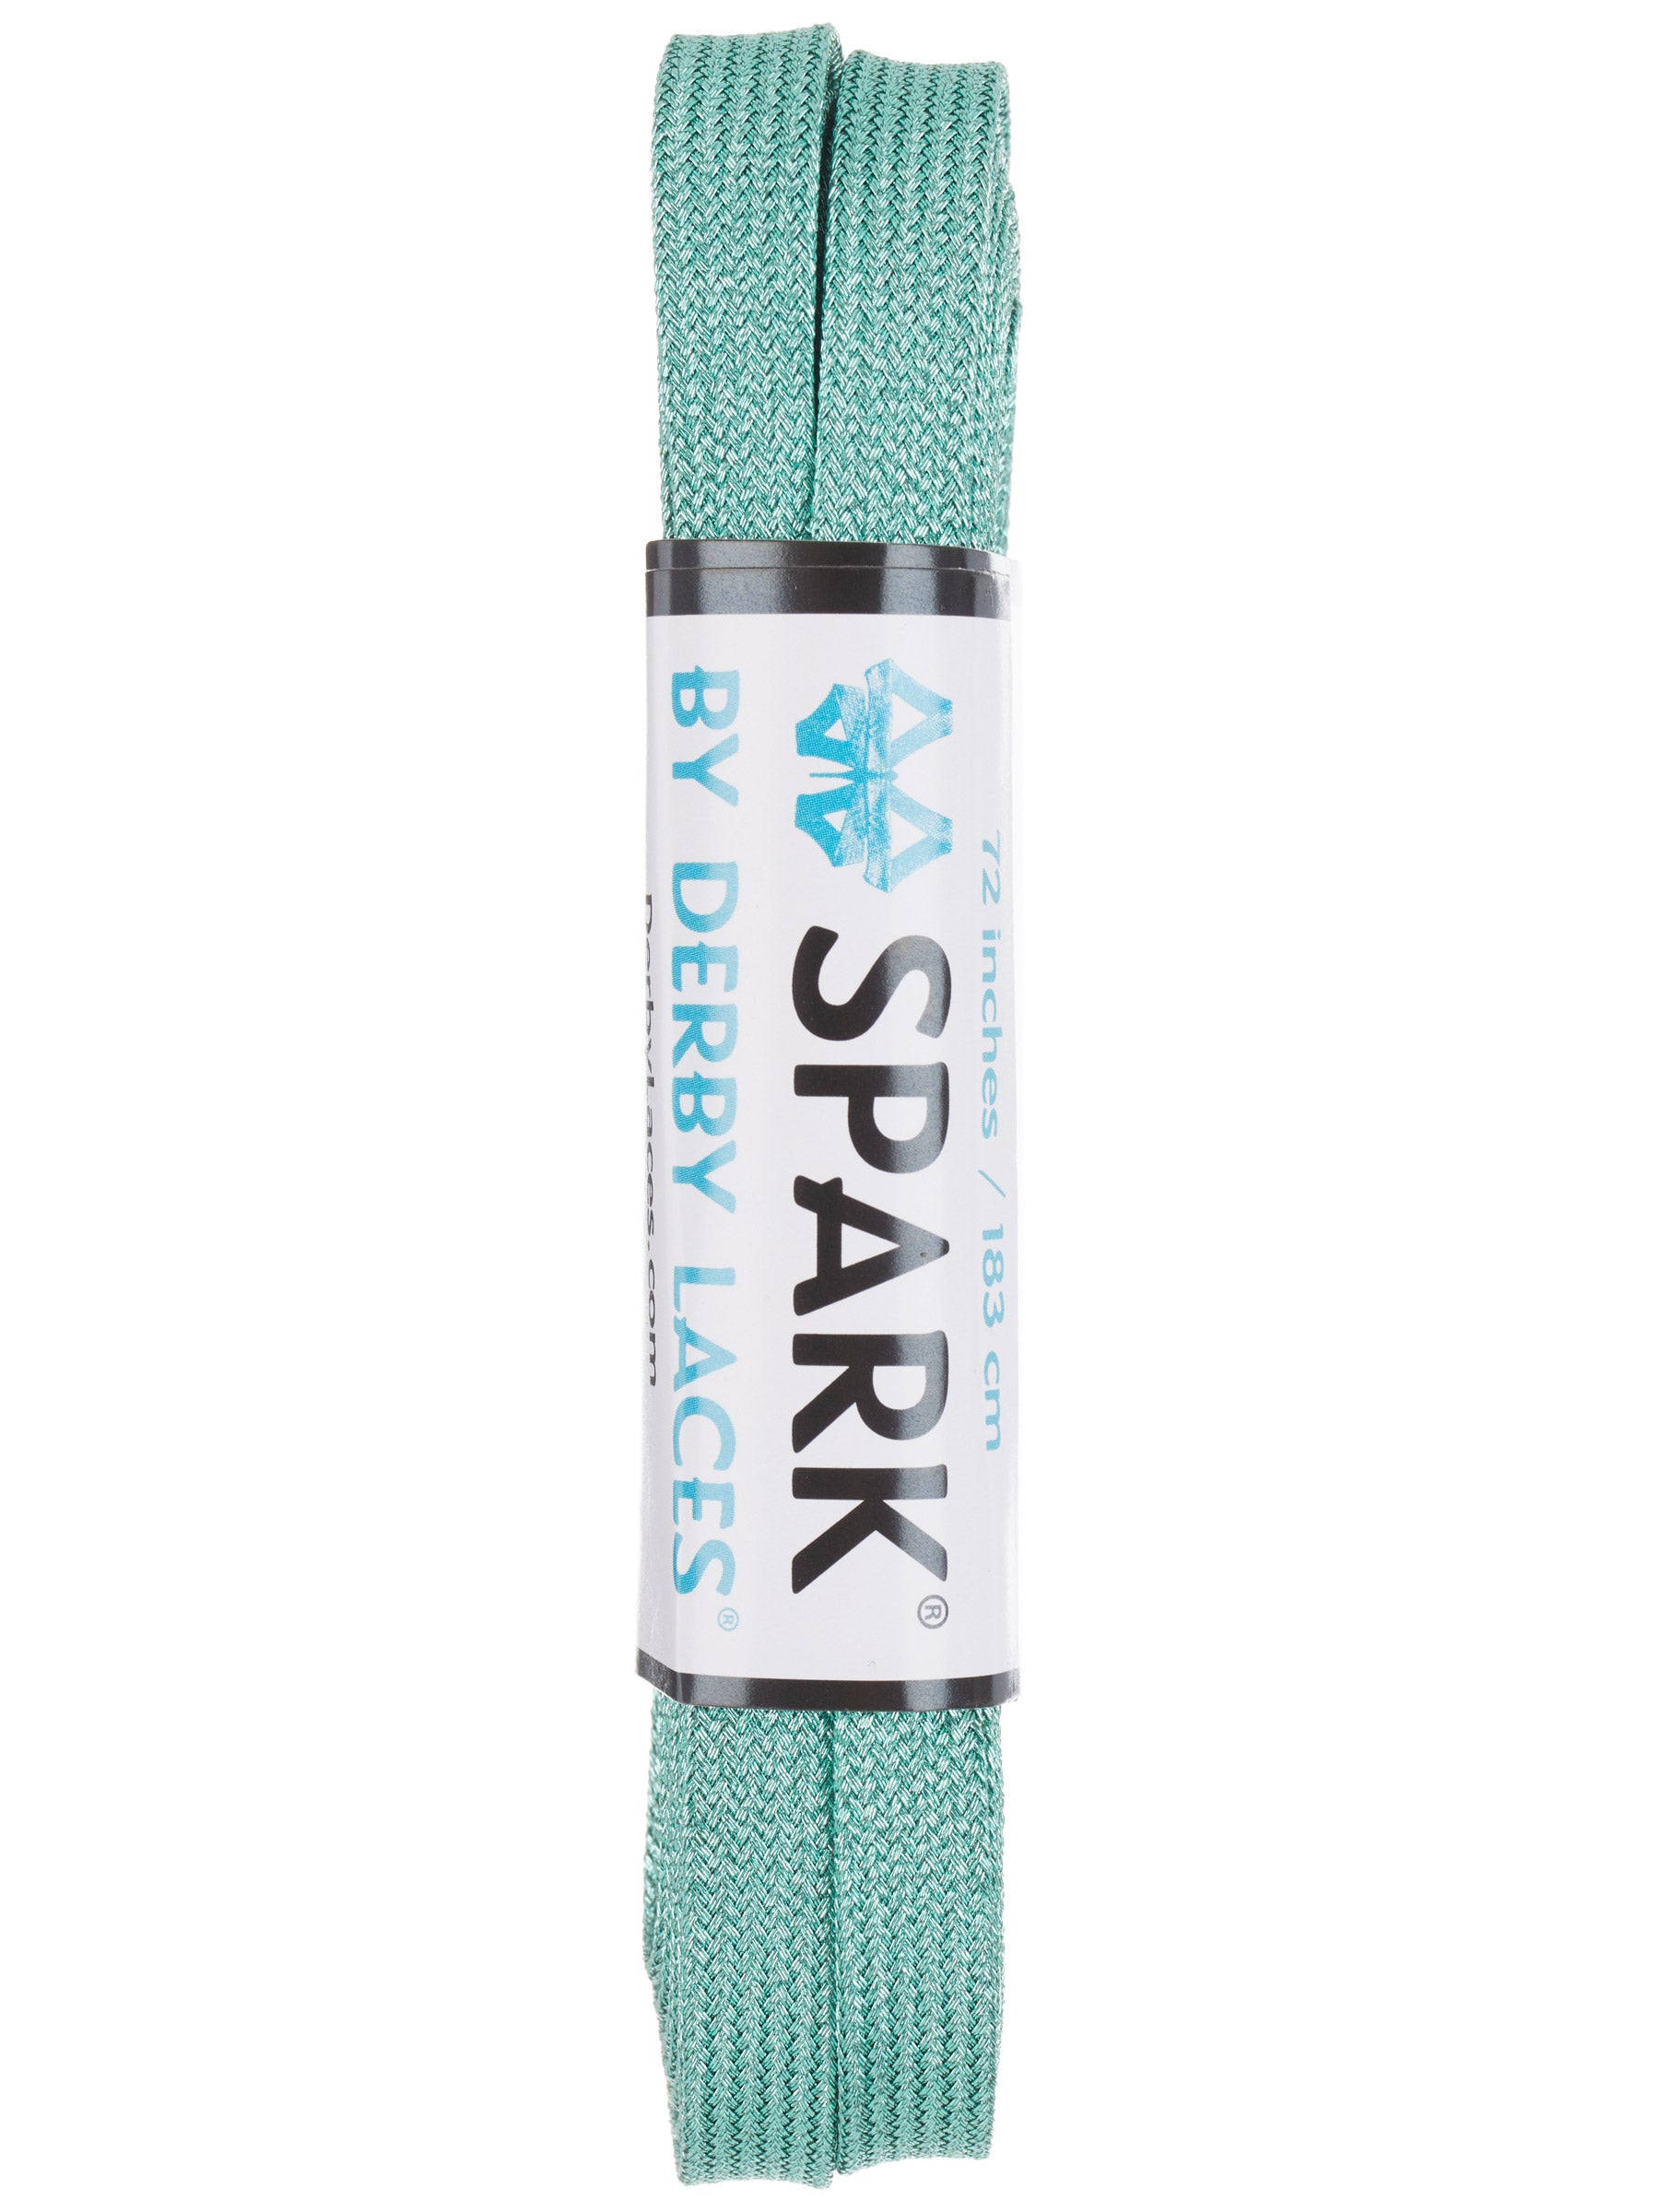 Derby Laces Silver 60 Inch Spark Skate Lace for Roller Derby Hockey and Ice Skates and Boots 